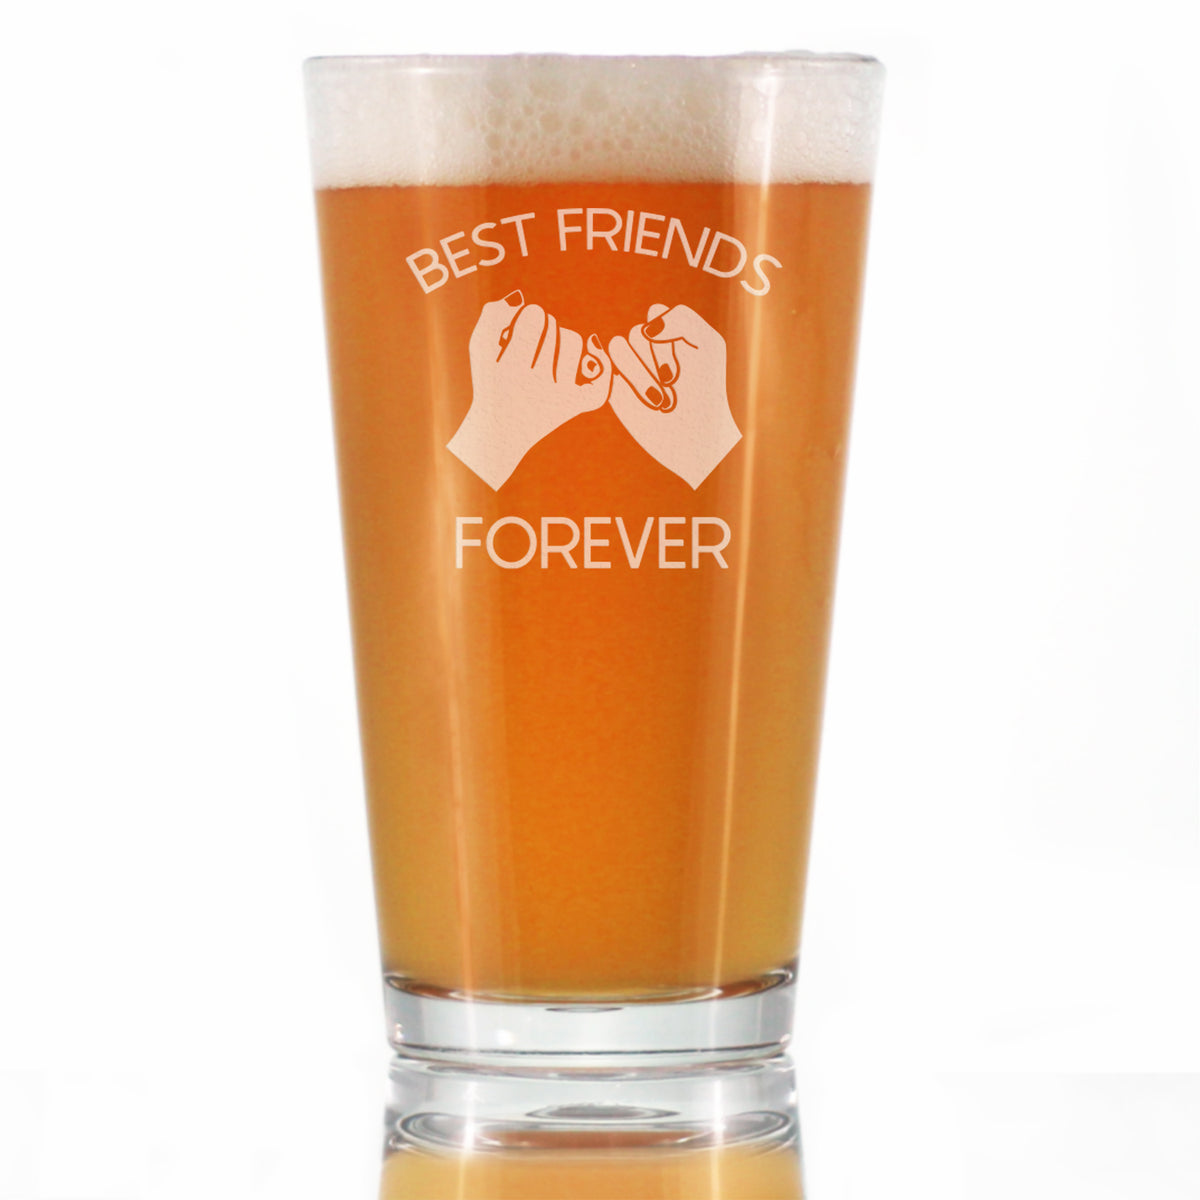 Best Friends Forever - Pint Glass for Beer - Cute Funny Farewell Gift For BFF Moving Away - Pinky Promise -16 oz Glasses